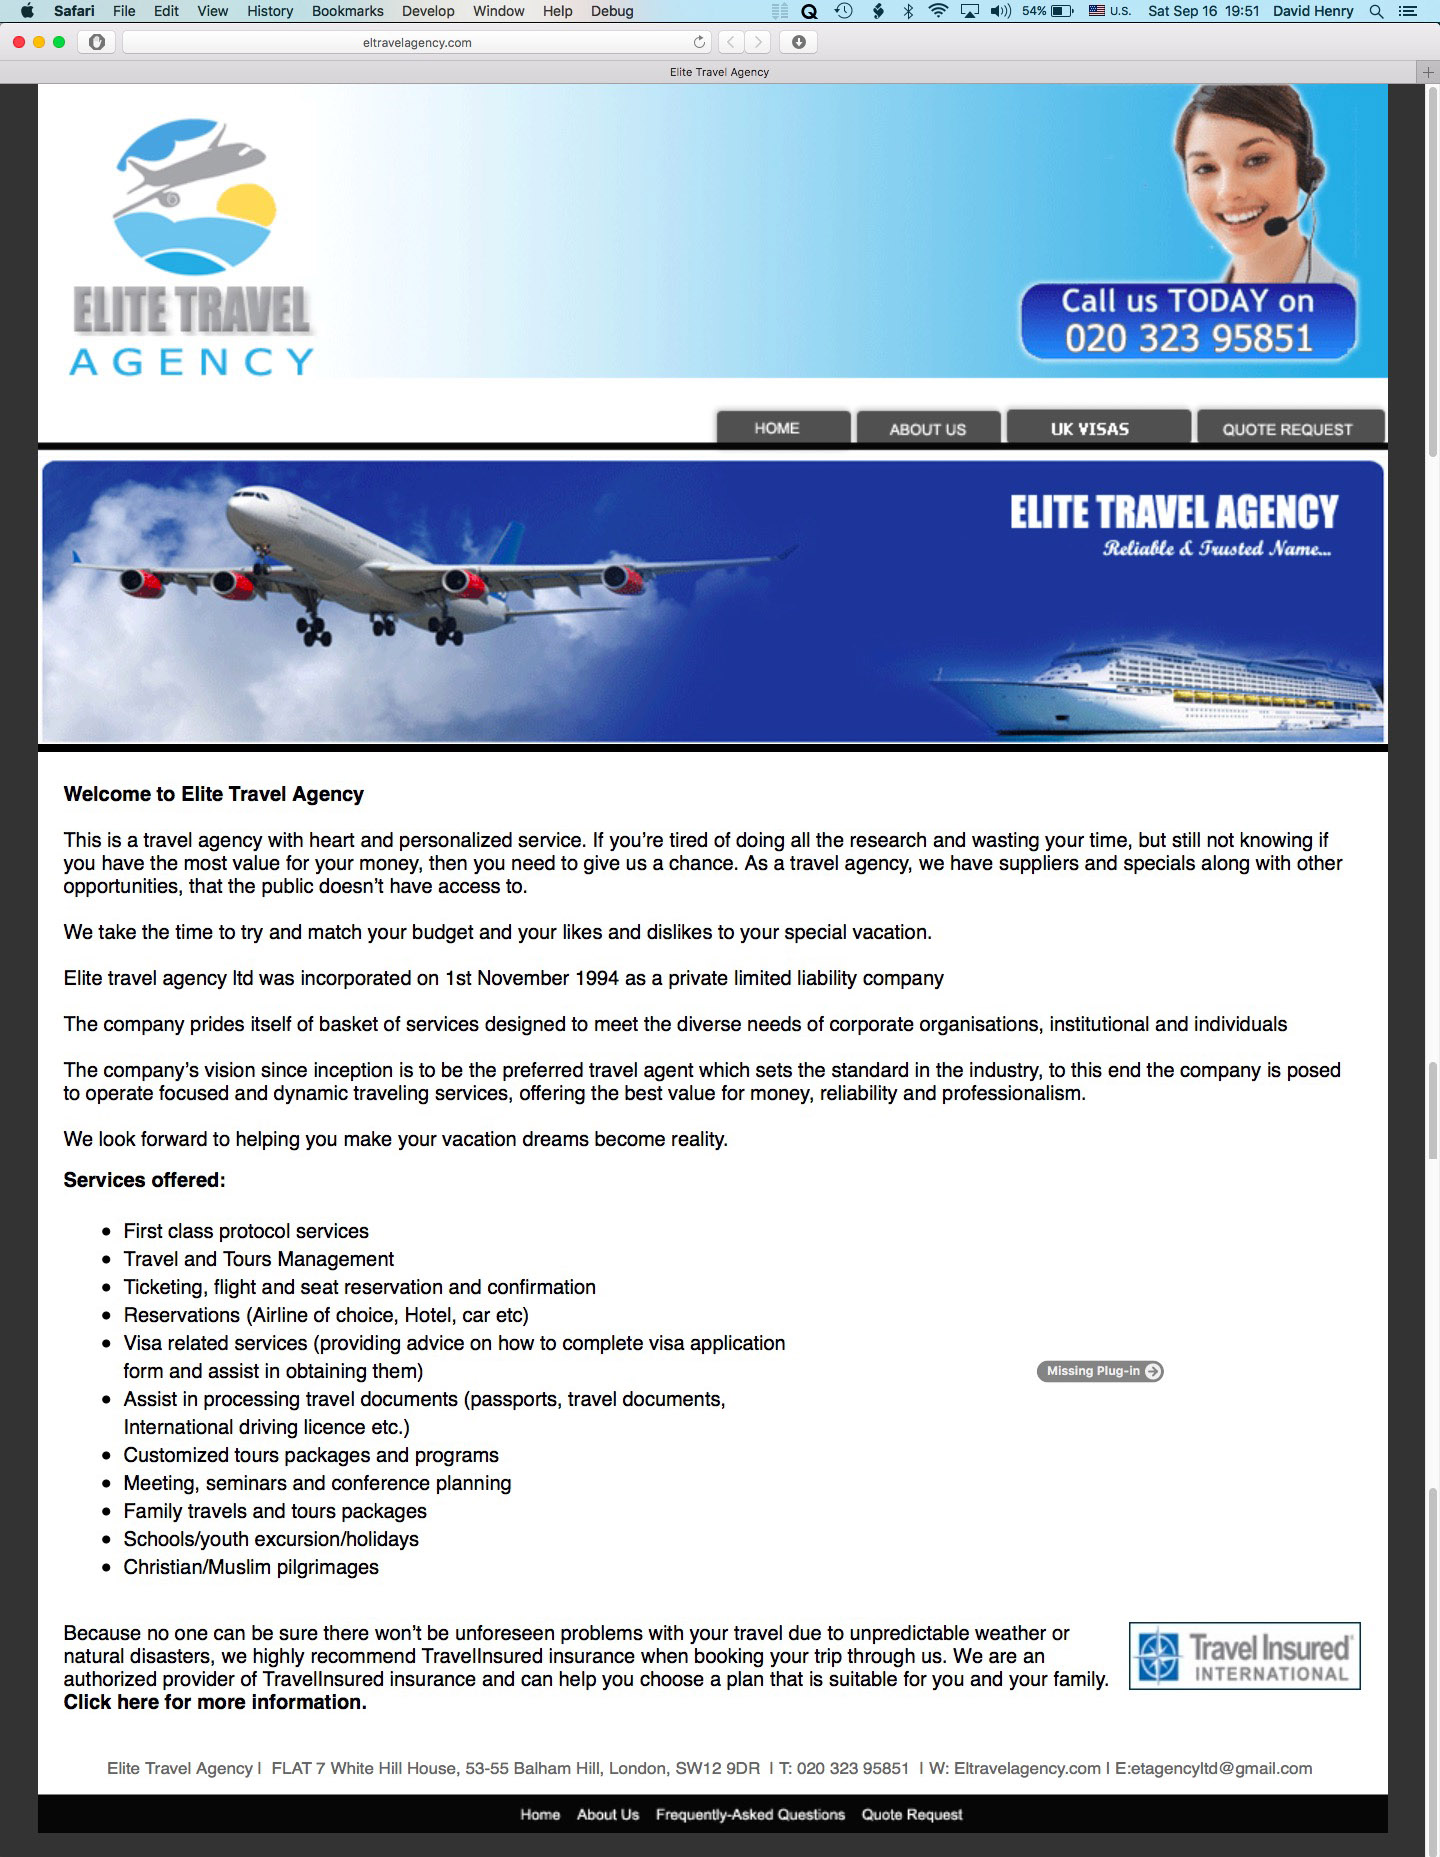 Elite Travel Agency’s home page.